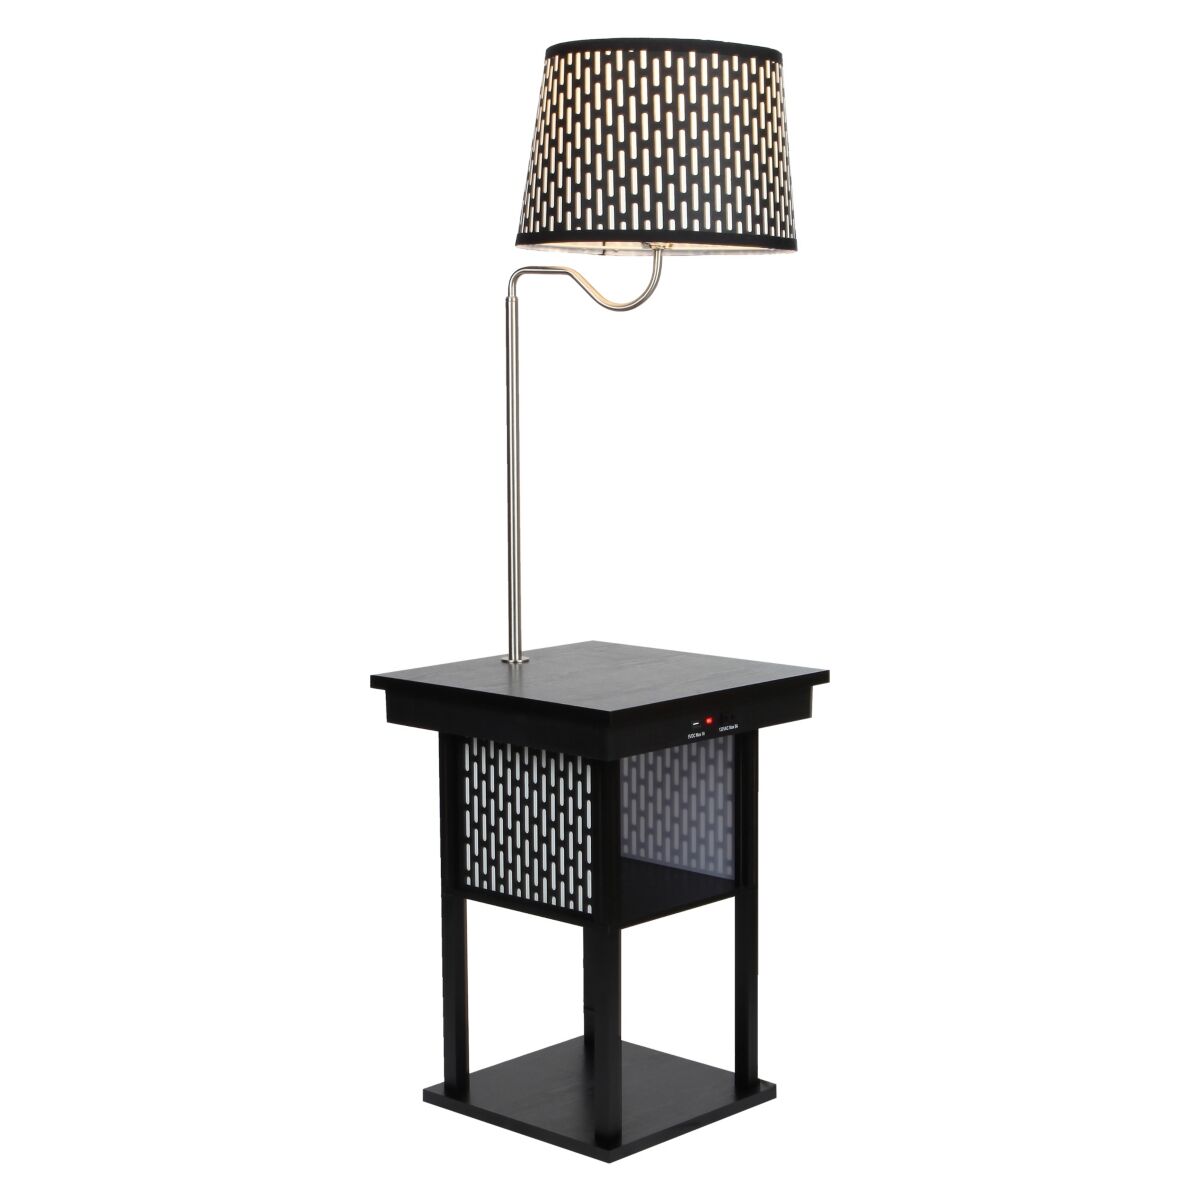 Brightech Madison Table & Led Lamp Combo with Usb Port and Outlet - Classic Black/Pattern